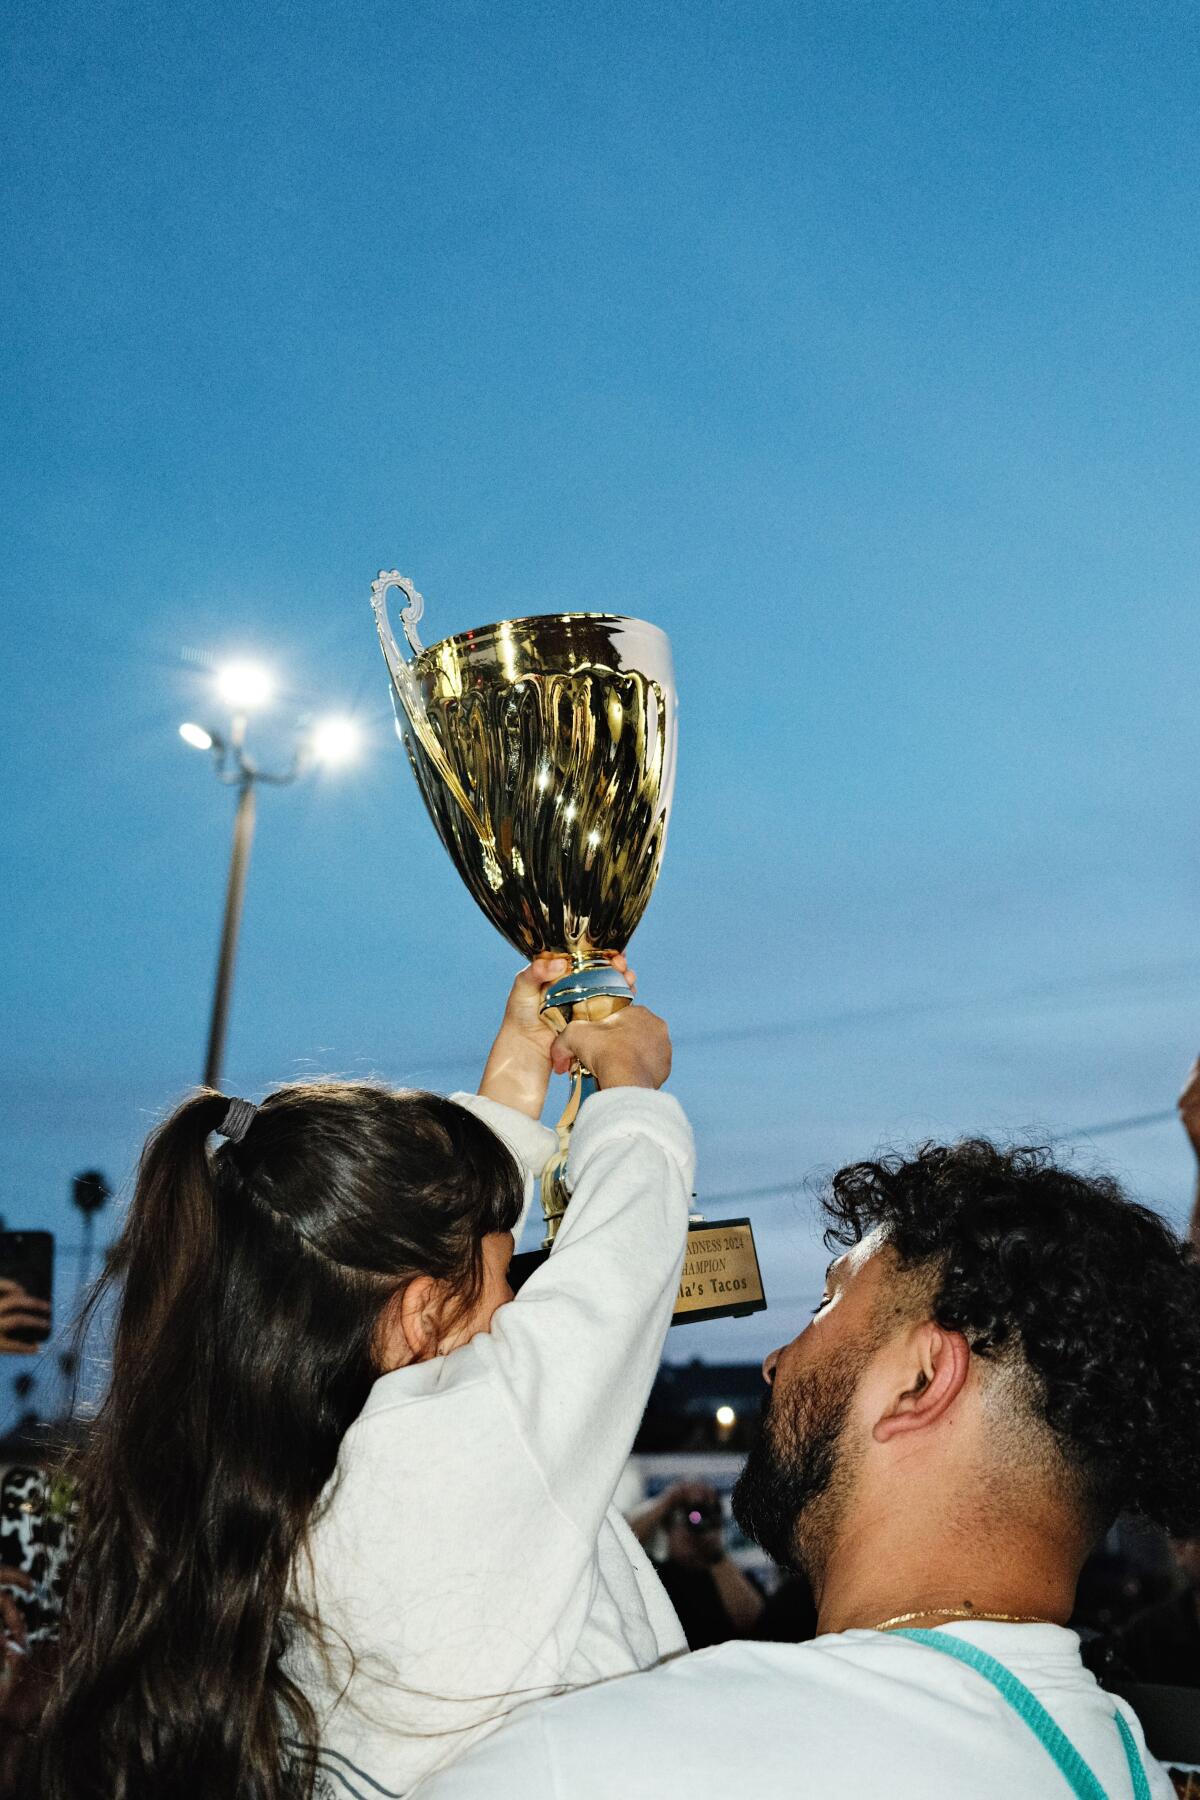 A girl, seen from behind, holds a large gold trophy in a parking lot at sunset.